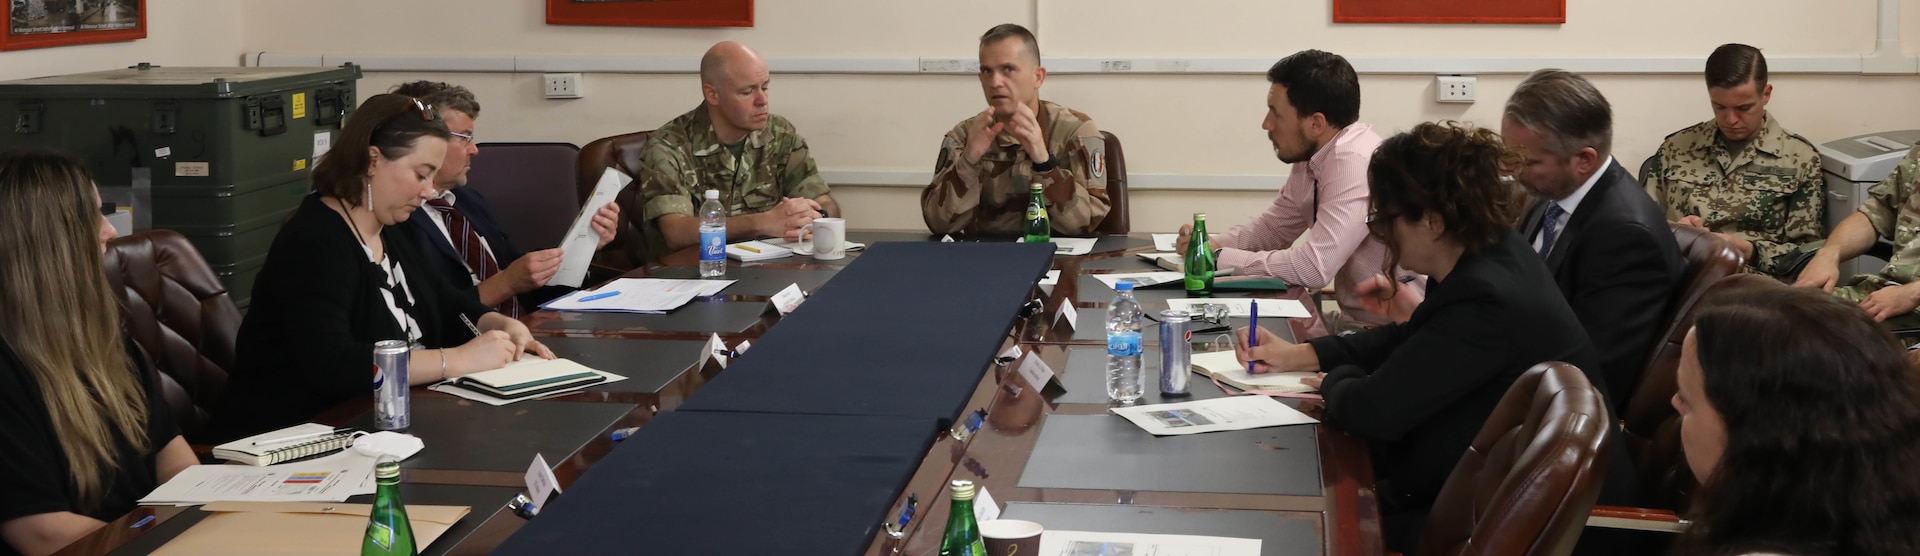 British Royal Air Force Group Capt. Rob O’Dell (left), the director of the Northeast Syria Coordination Group of the Directorate of Civil Environment (DICE), and French Air Force Brig. Gen. Vincent Coste (center), the director of DICE, brief Ambassadorial representatives and aides from multiple Coalition countries about the importance of finding solutions for successfully repatriating individually displaced persons from IDP camps in Iraq and northeast Syria during a meeting June 27, 2022, at Union III forward operating base, in Baghdad, Iraq. The meeting also enabled the DICE team to update the embassy representatives on the current programs and future plans for Combined Joint Task Force – Operation Inherent Resolve’s (CJTF-OIR) advise, assist and enable mission and the Coalition’s role in helping our partners create security and stability in the region. DICE is a directorate of CJTF-OIR. (U.S. Army photo by Sgt. Brian Reed)